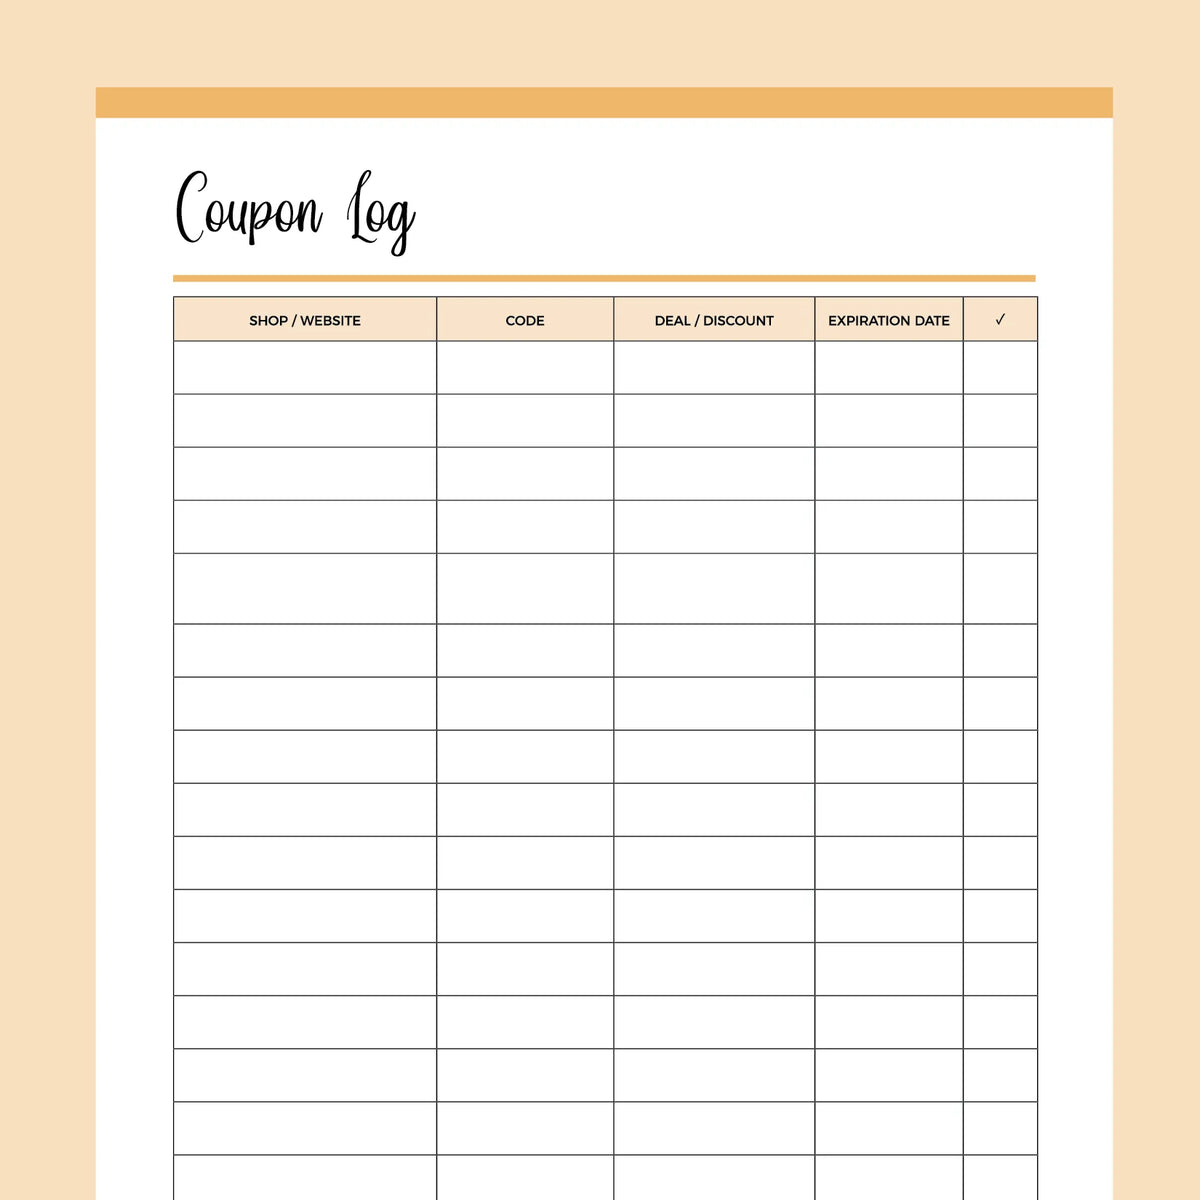 Discount Codes Tracker Printable Coupon Code Tracker Shop Discount Savings  Printable PDF A4 A5 Letter Half Letter (Download Now) 